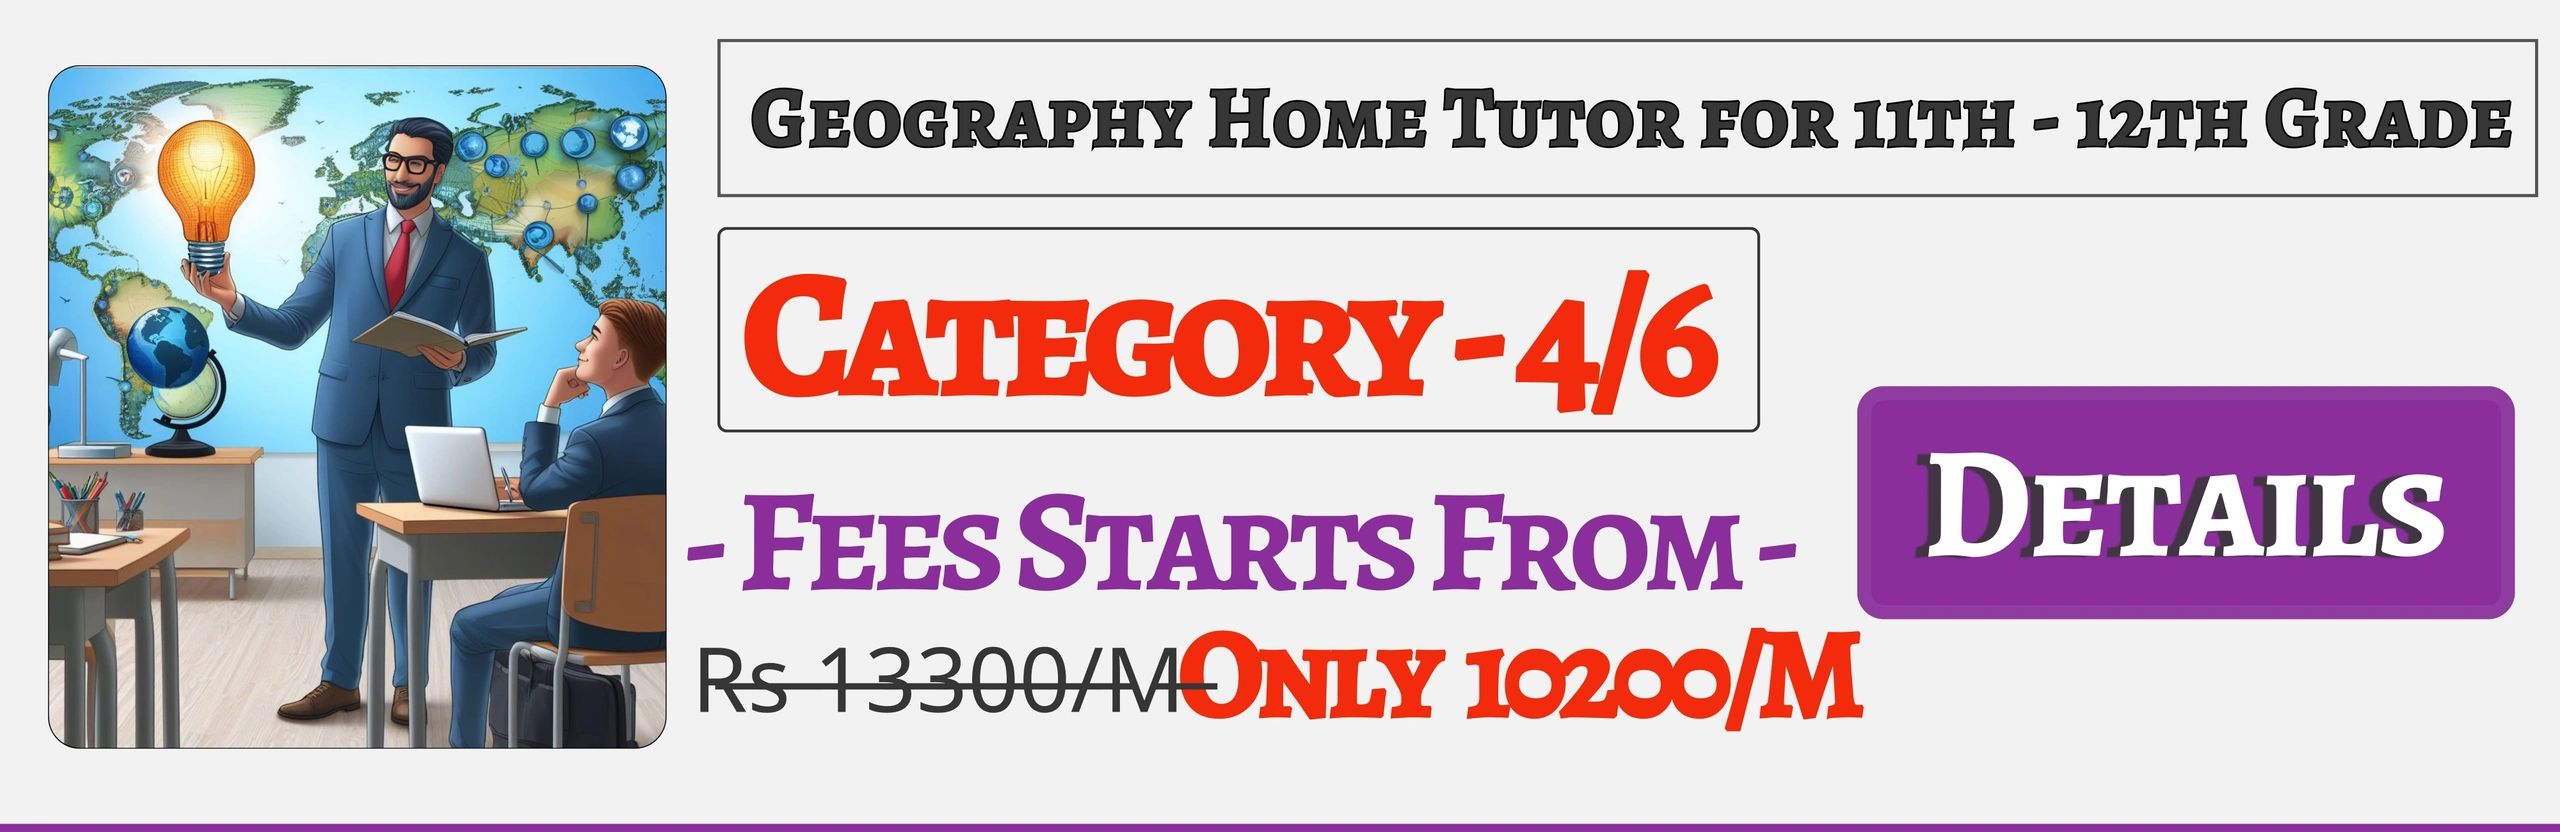 Book Best Nearby Geography Home Tuition Tutors For 11th & 12th In Jaipur , Fees Only 10200/M